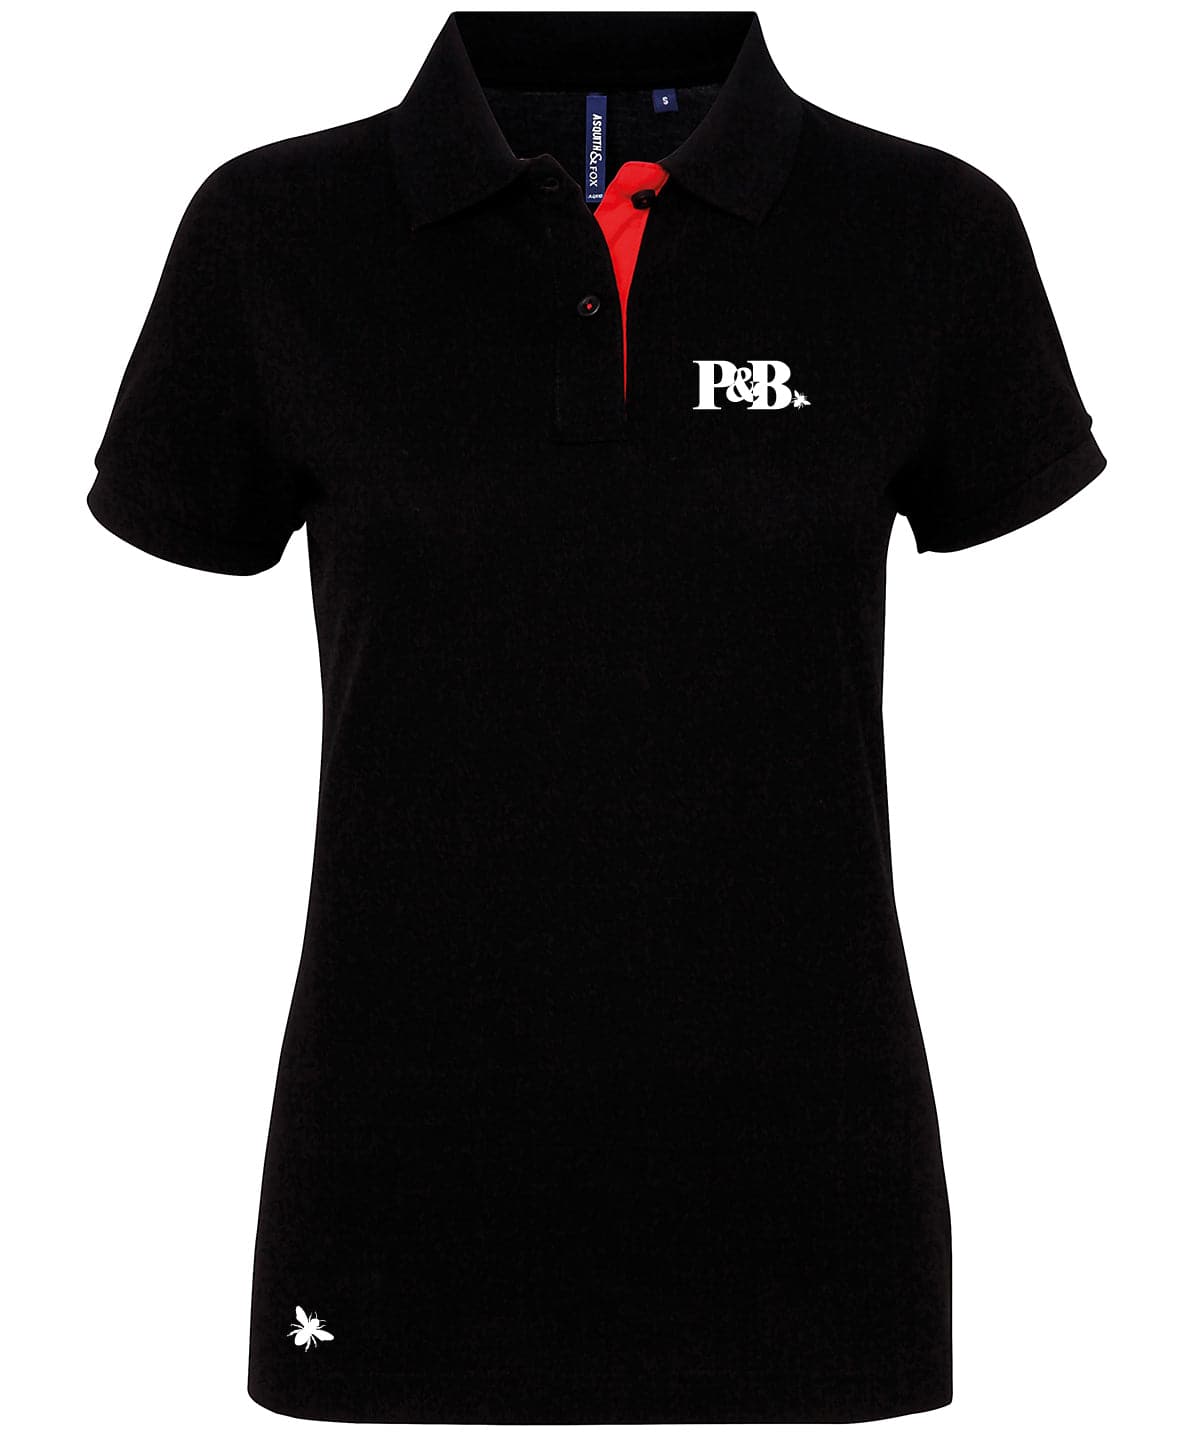 Pippa - Ladies contrast polo